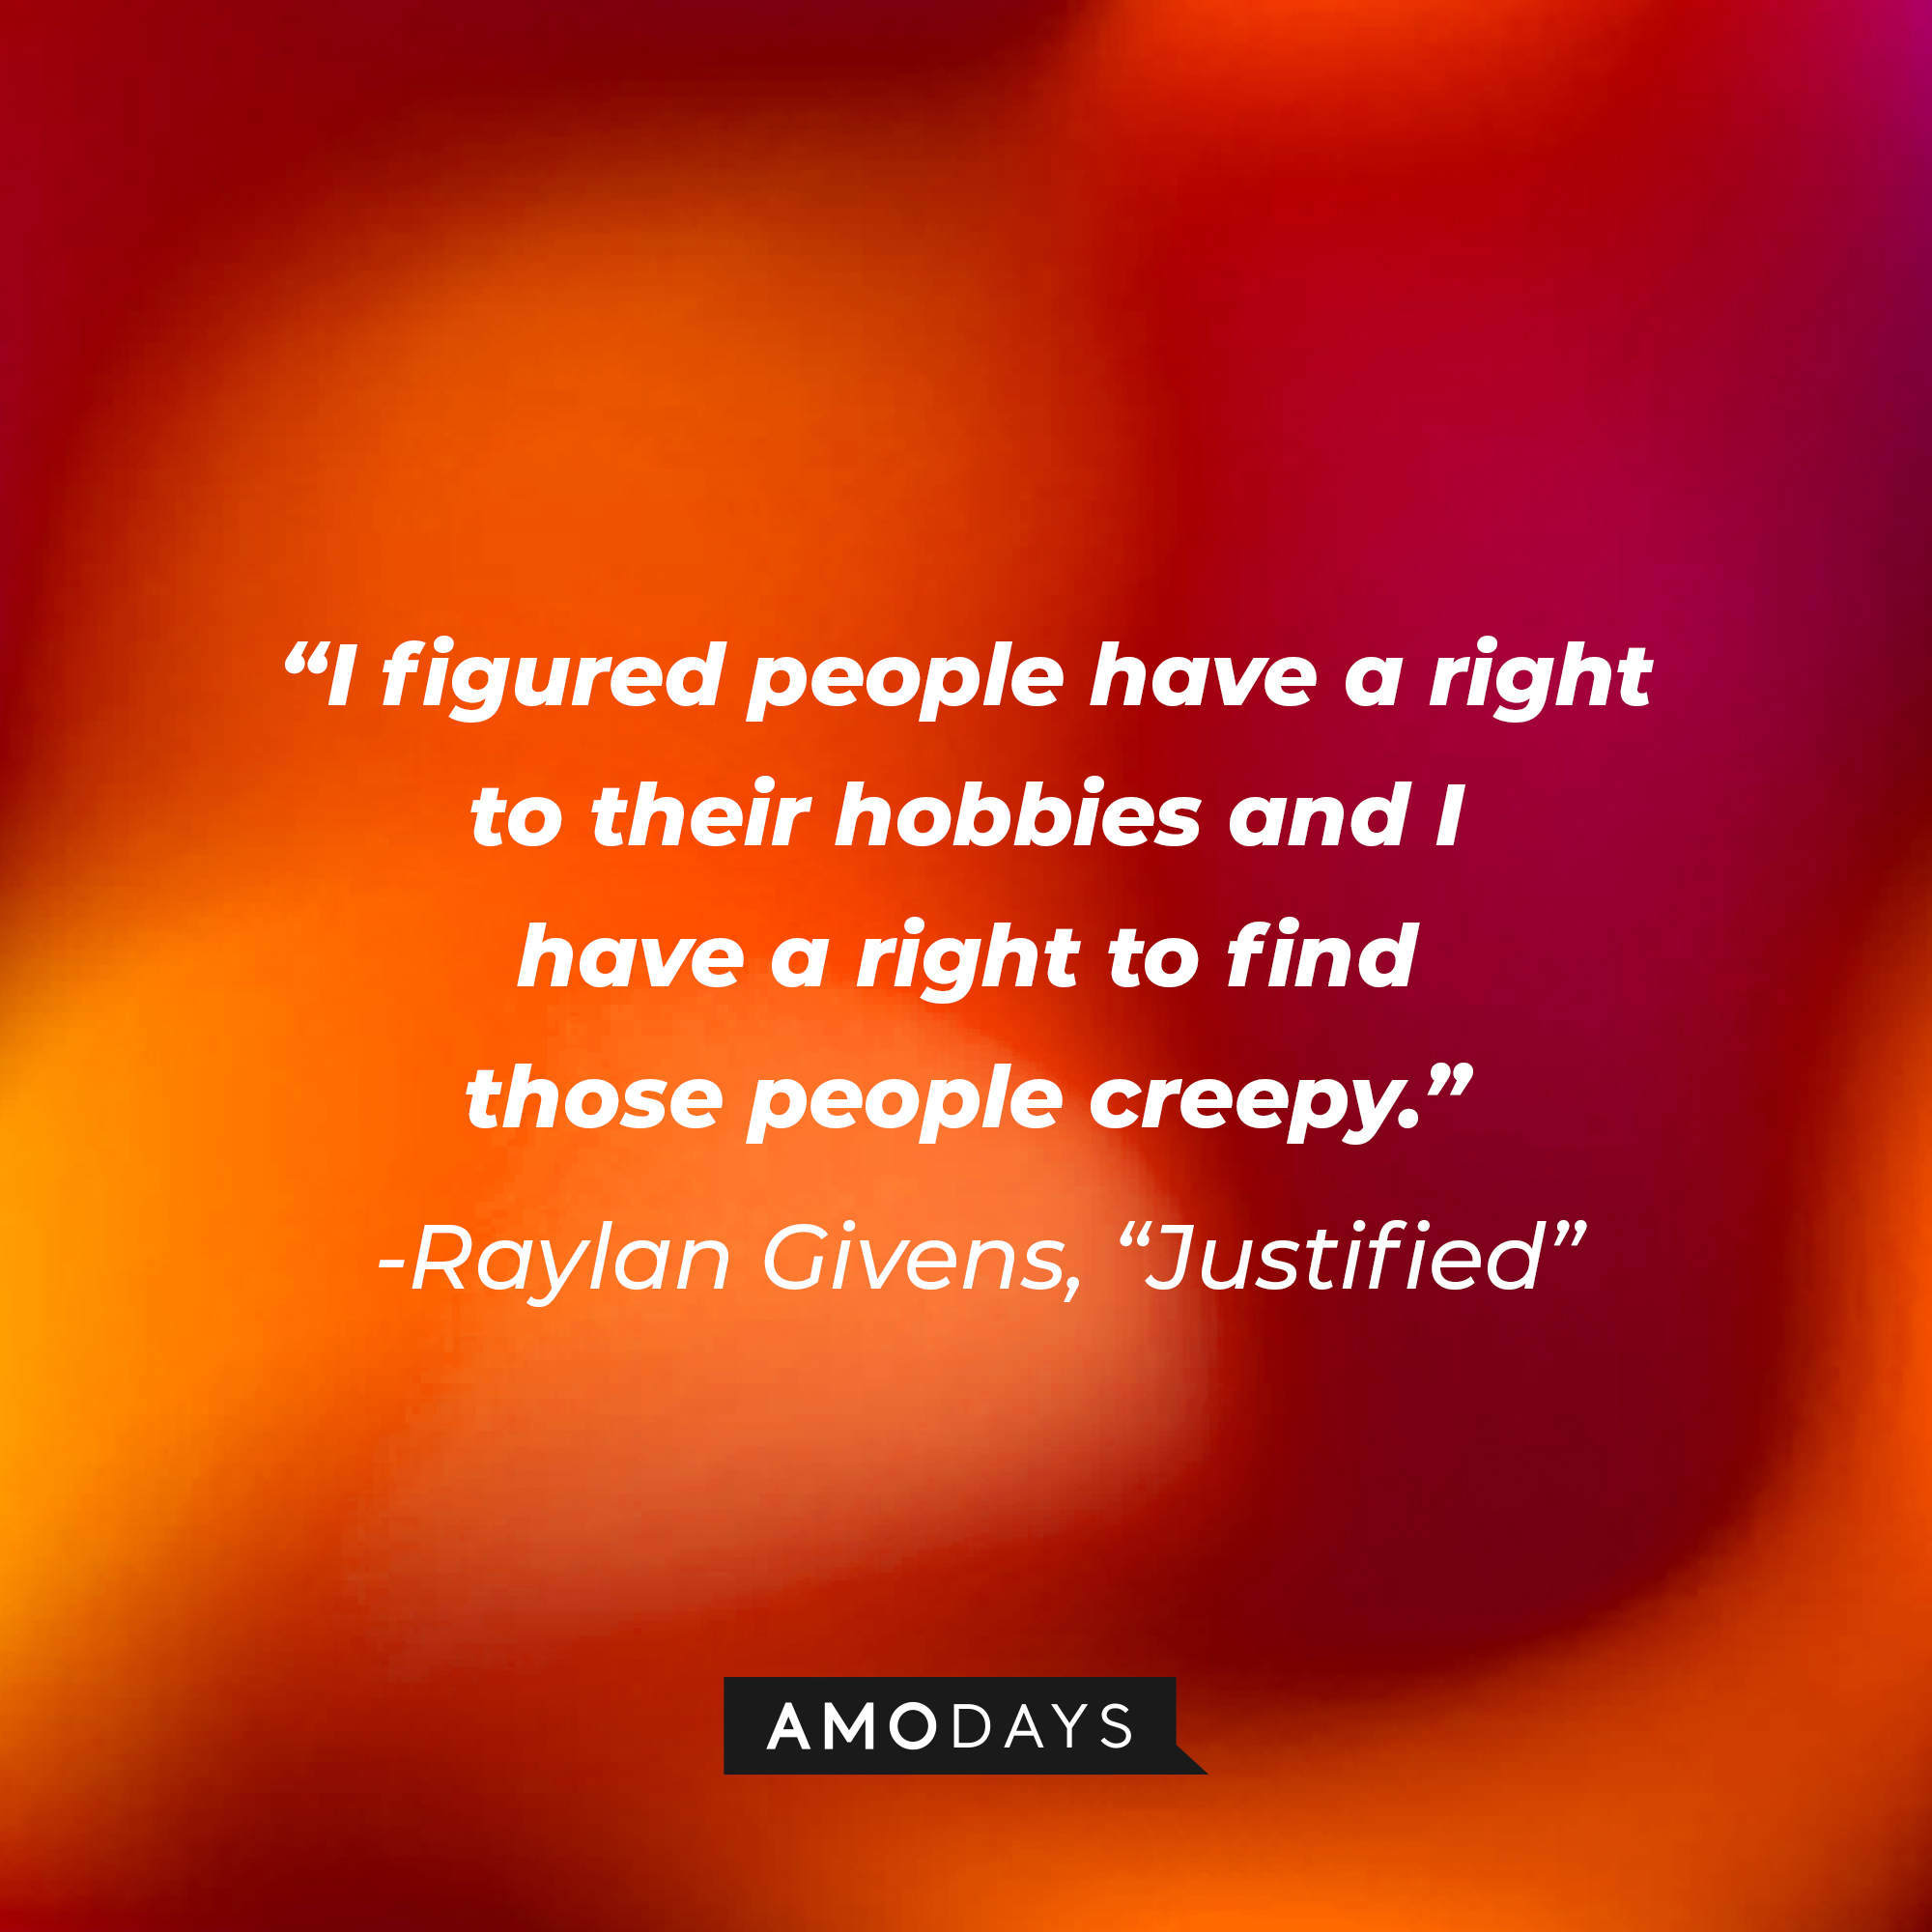 Raylan Givens’ quote from “Justified”: “I figured people have a right to their hobbies and I have a right to find those people creepy.” | Source: AmoDays